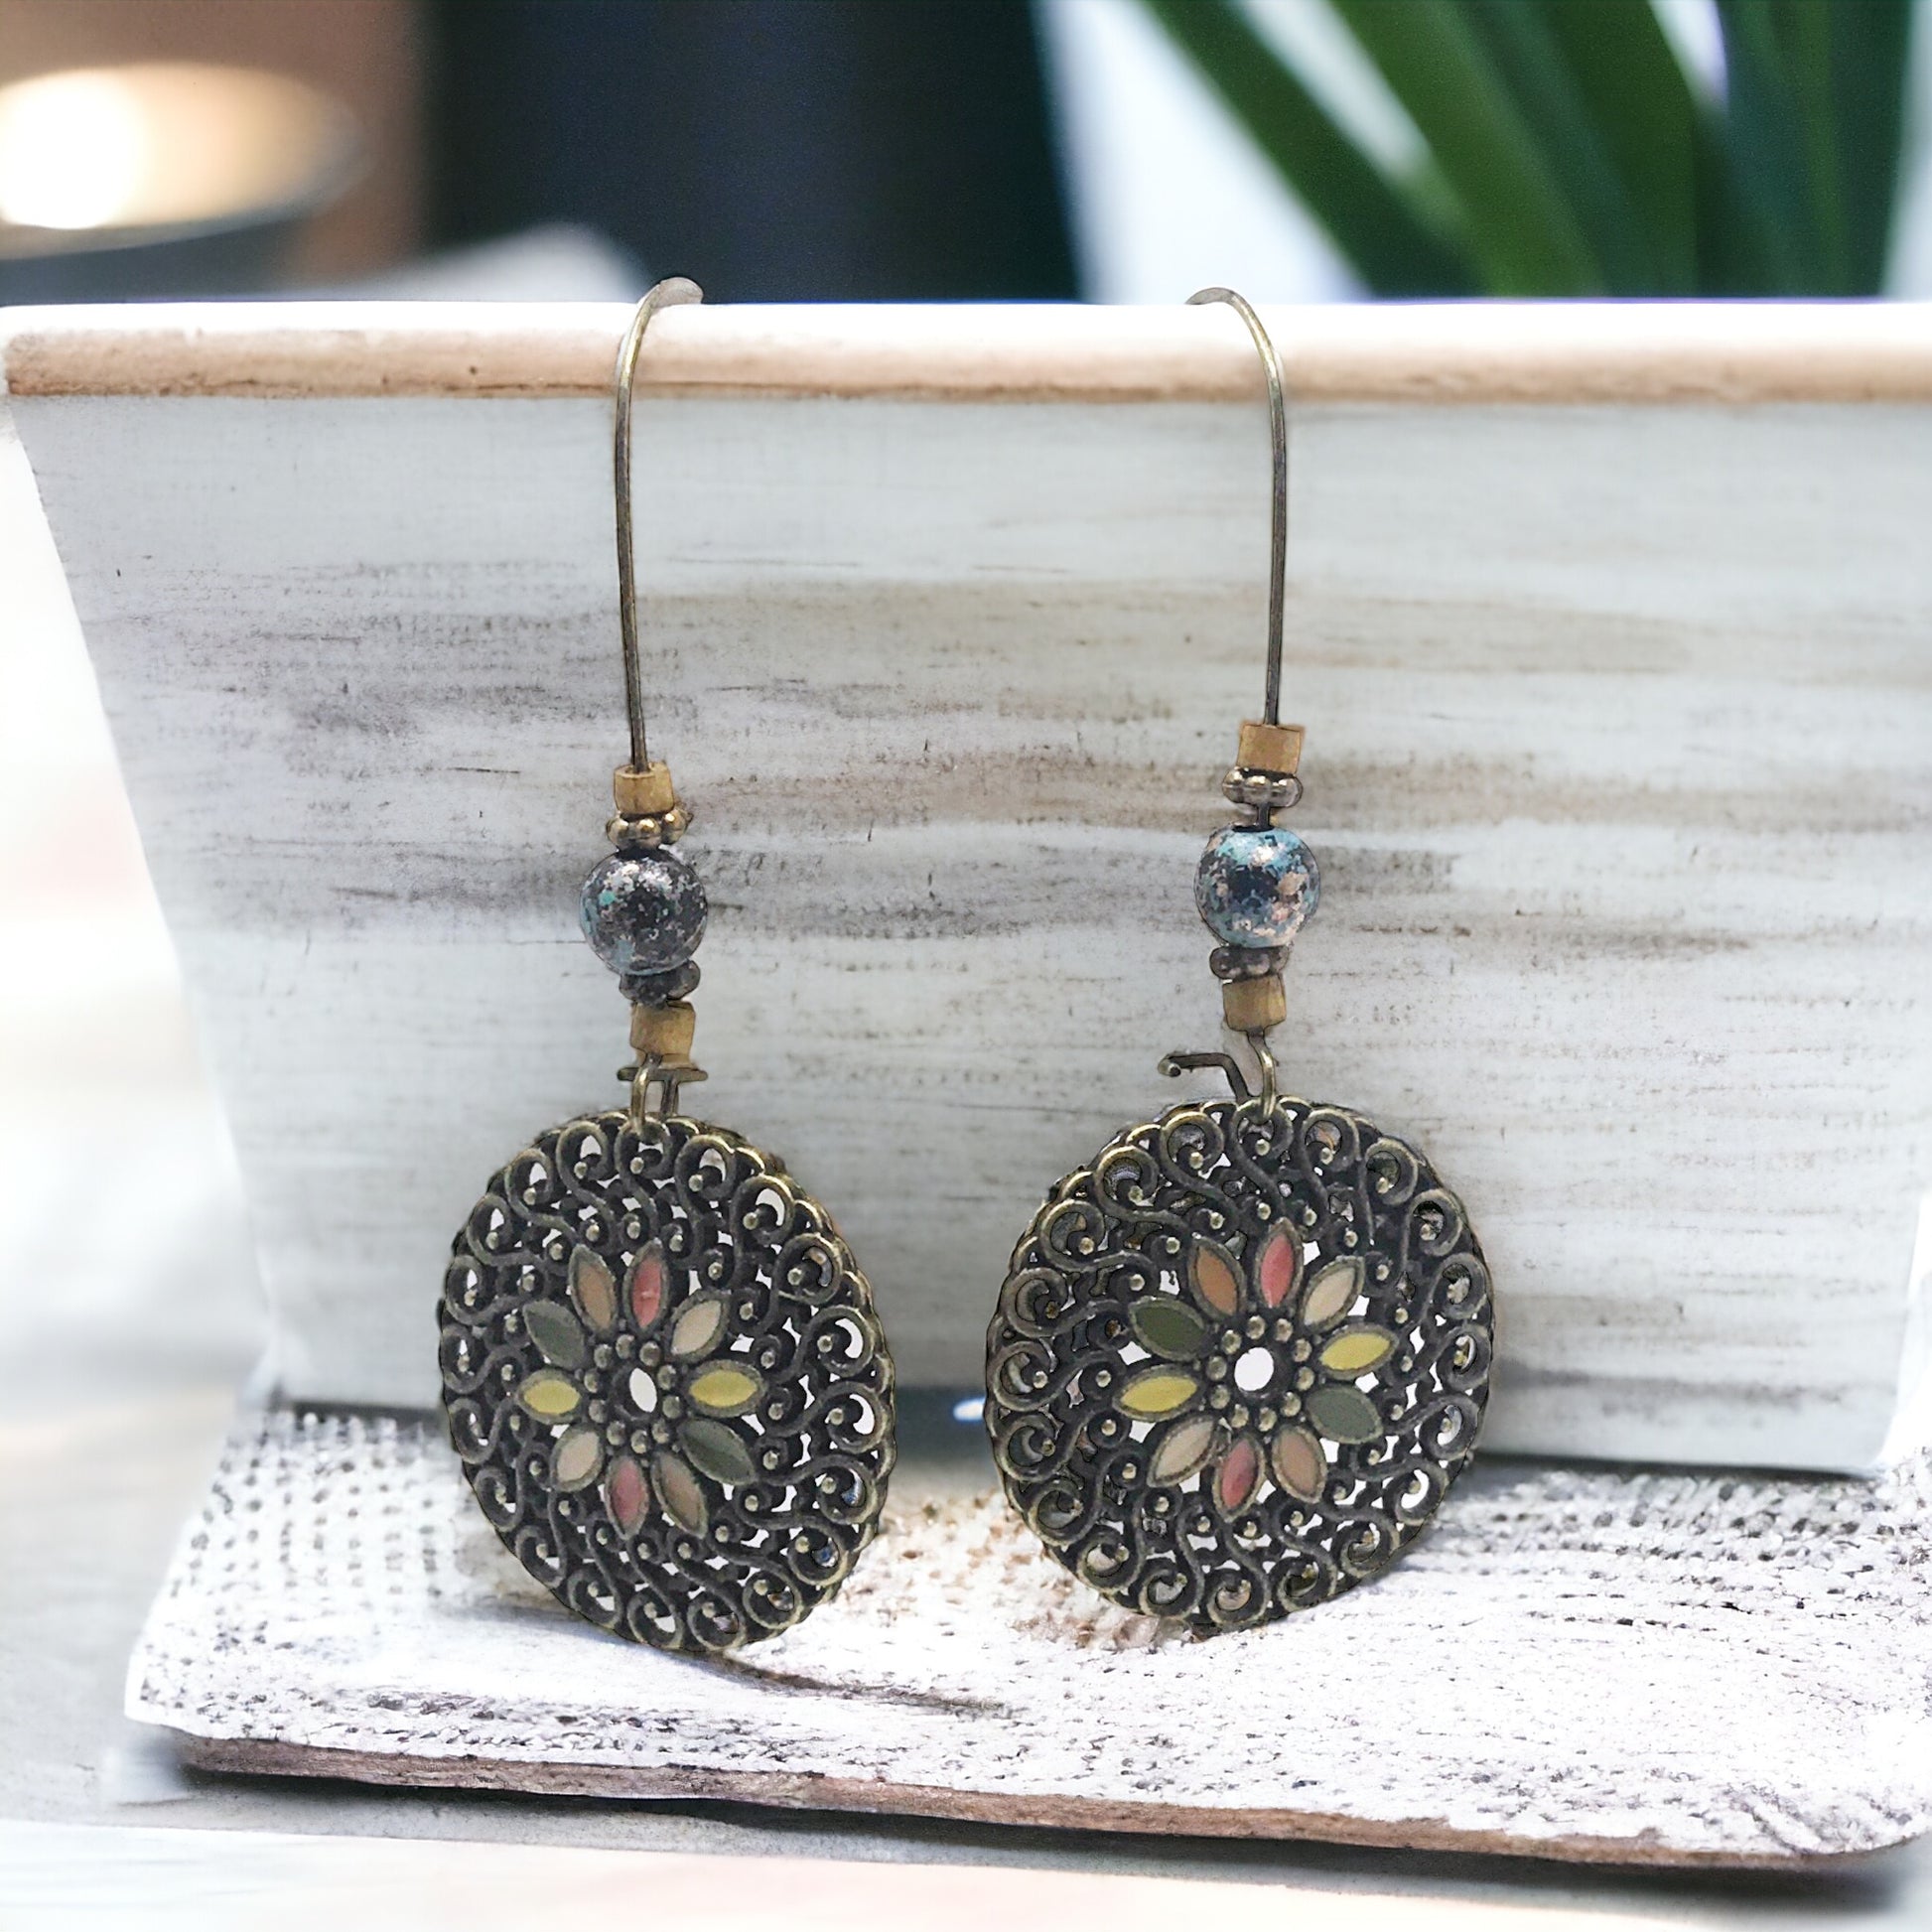 Round Boho Floral Dangle Earrings - Stylish Chic Accessories with a Bohemian Flair